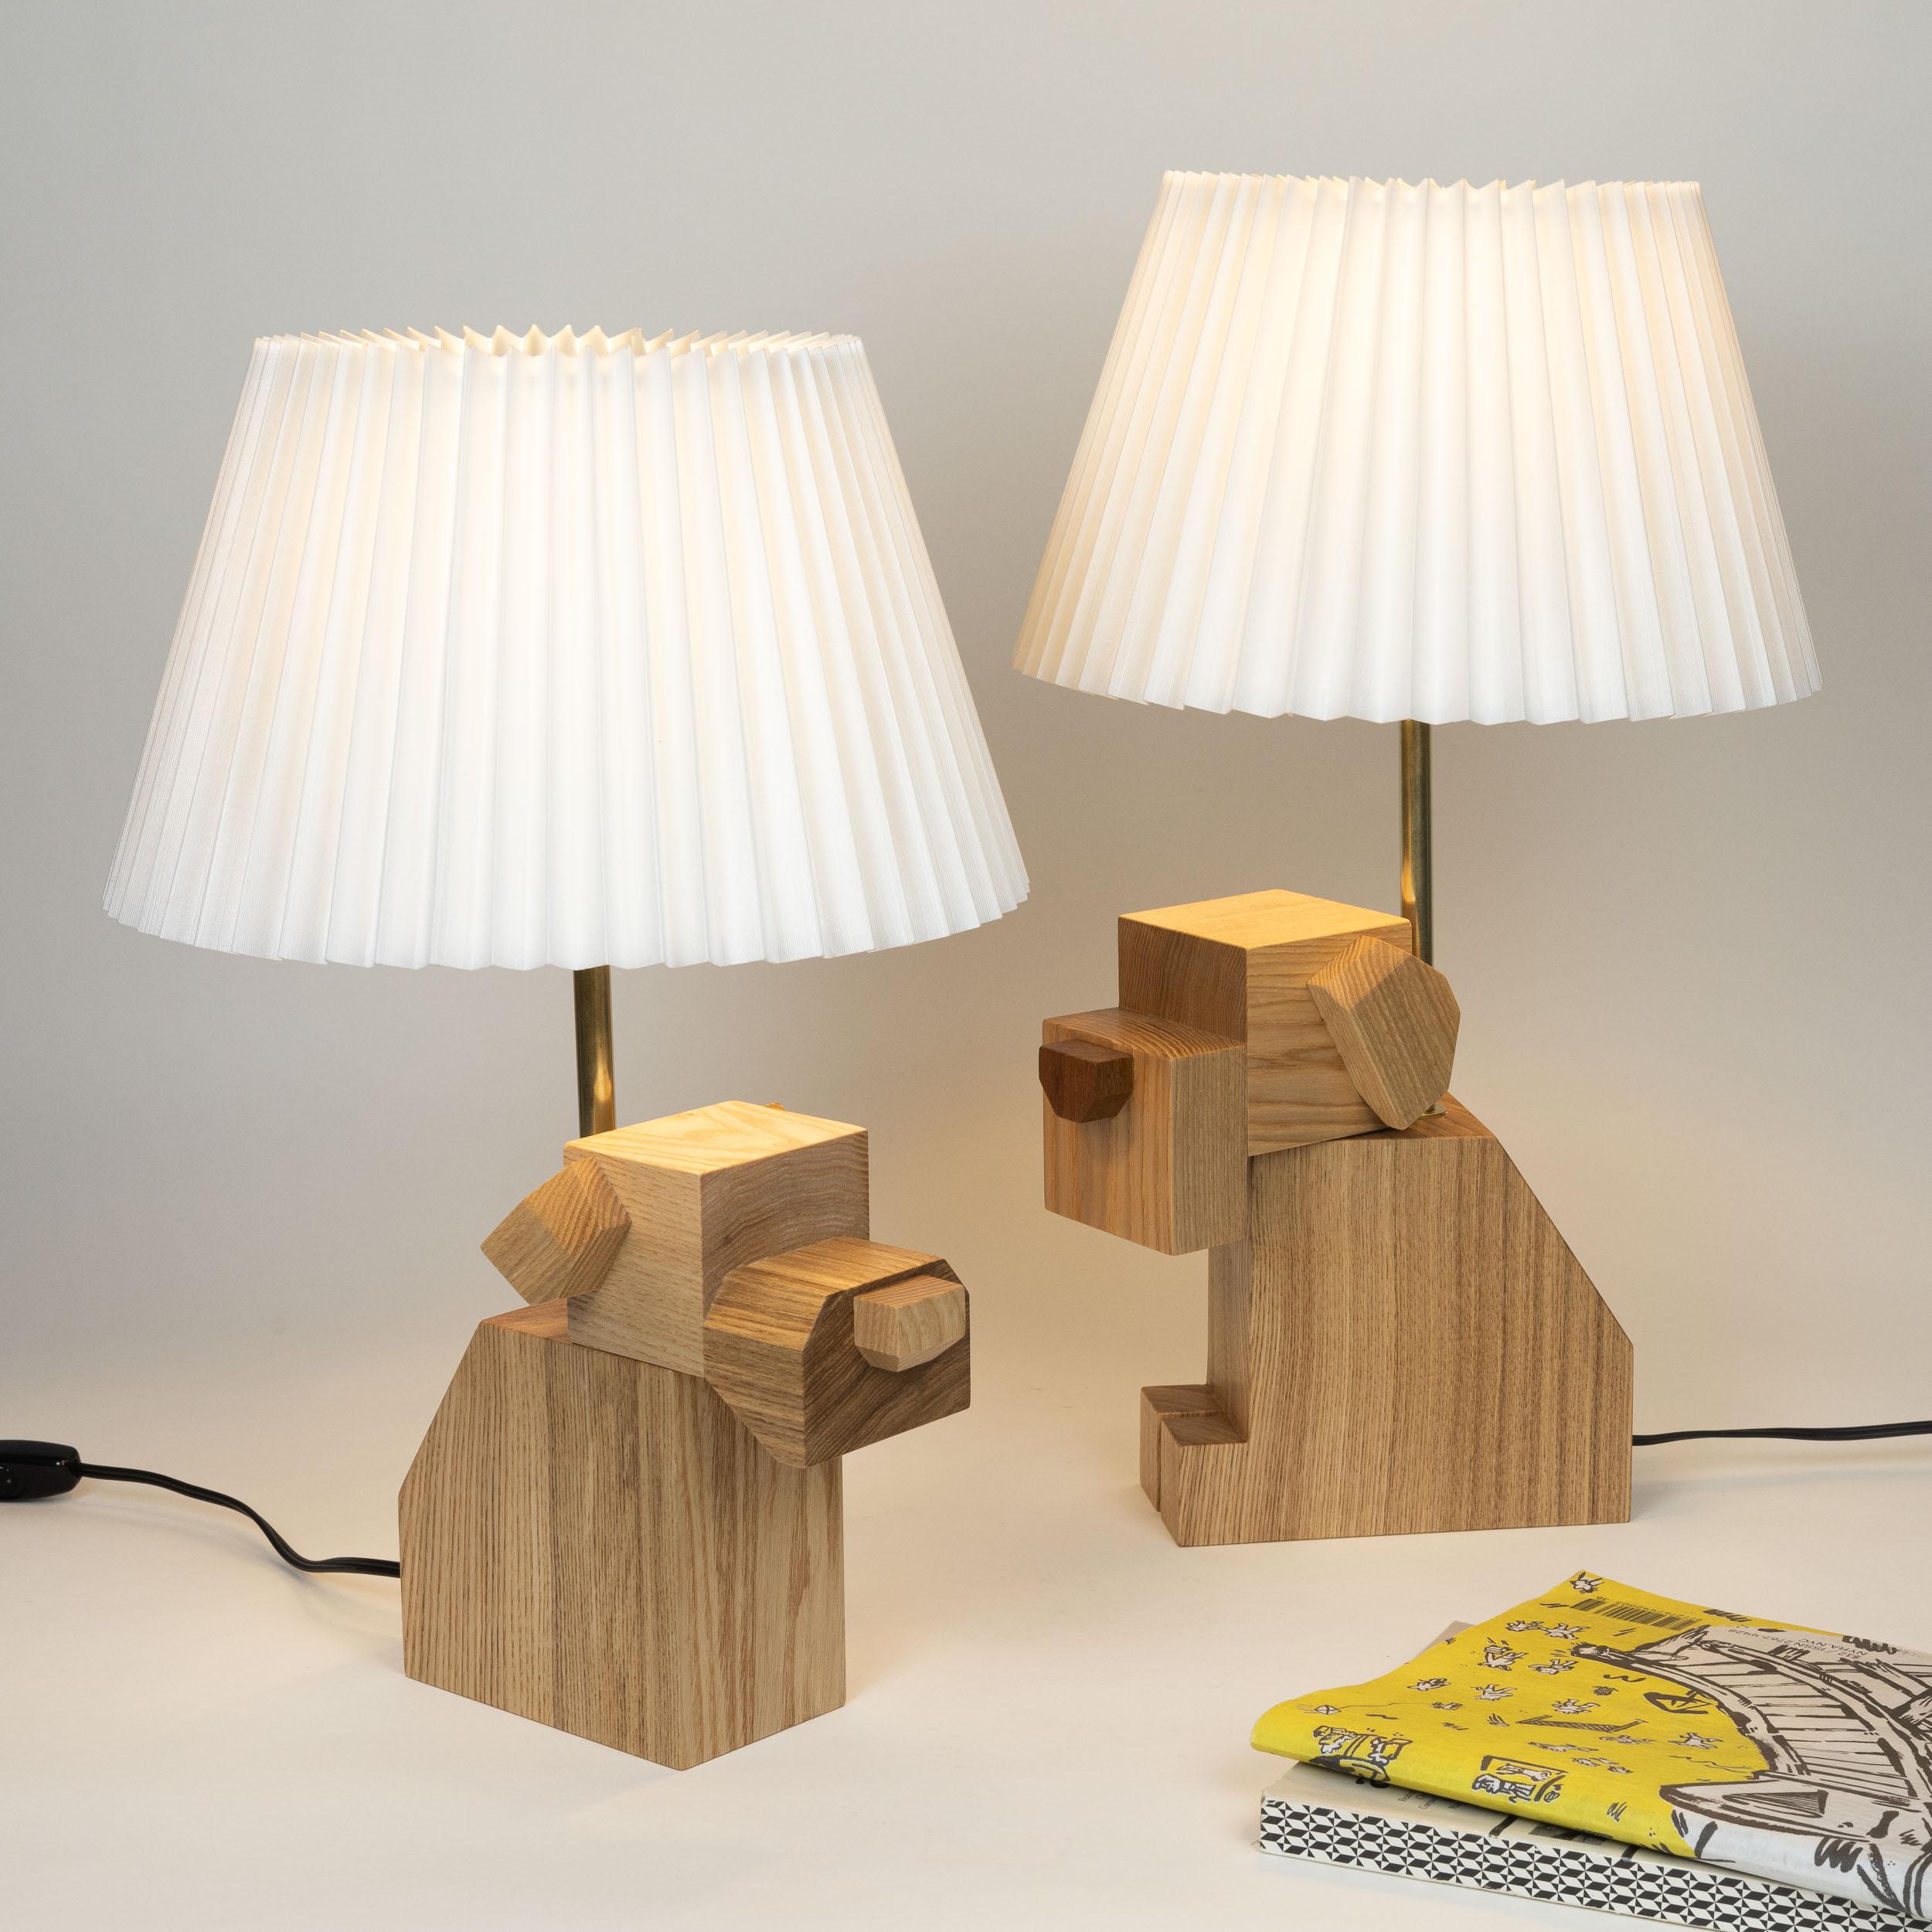 Hand-Crafted Pair of Wood Dog Table Lamps with White Fabric Shades, hand-crafted, hardwood For Sale